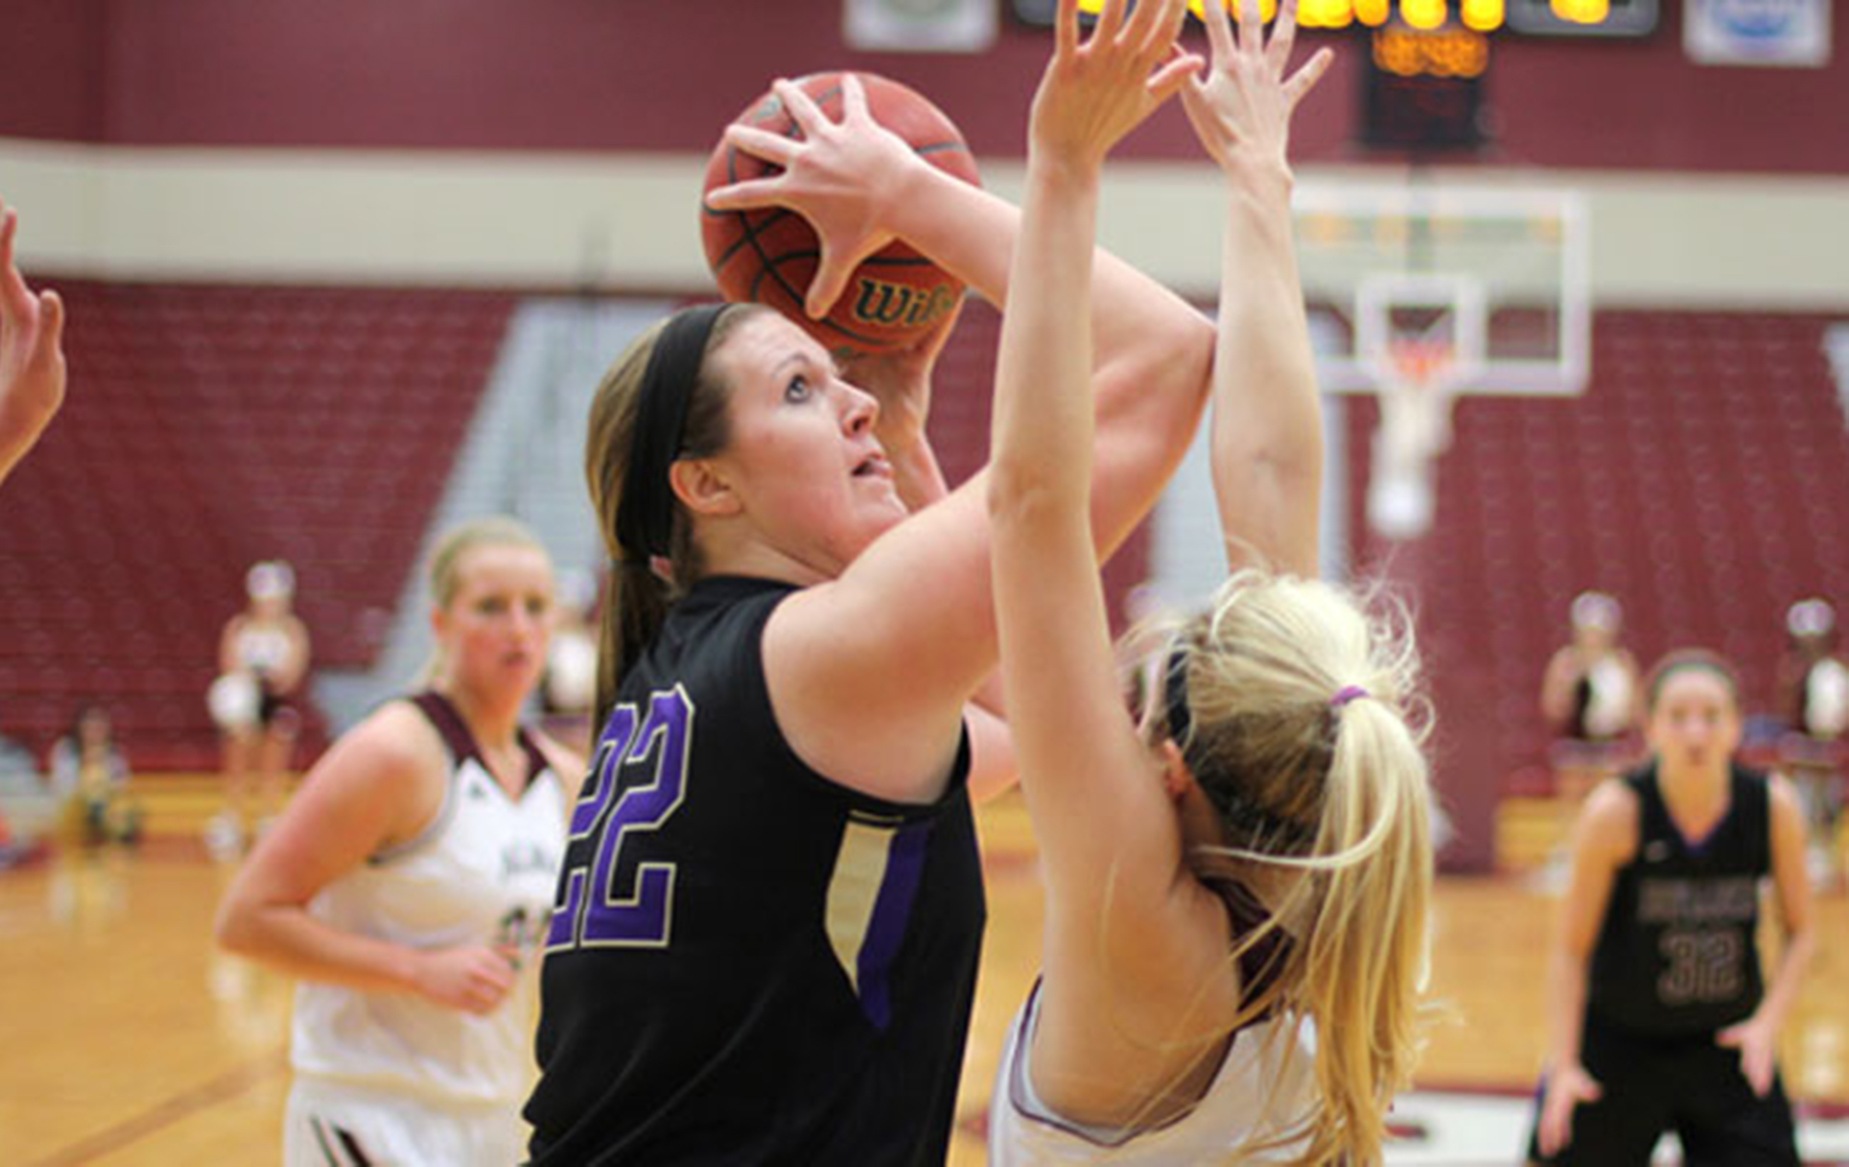 Tietje Sets DC Rebounds Record in Loss to Hanover